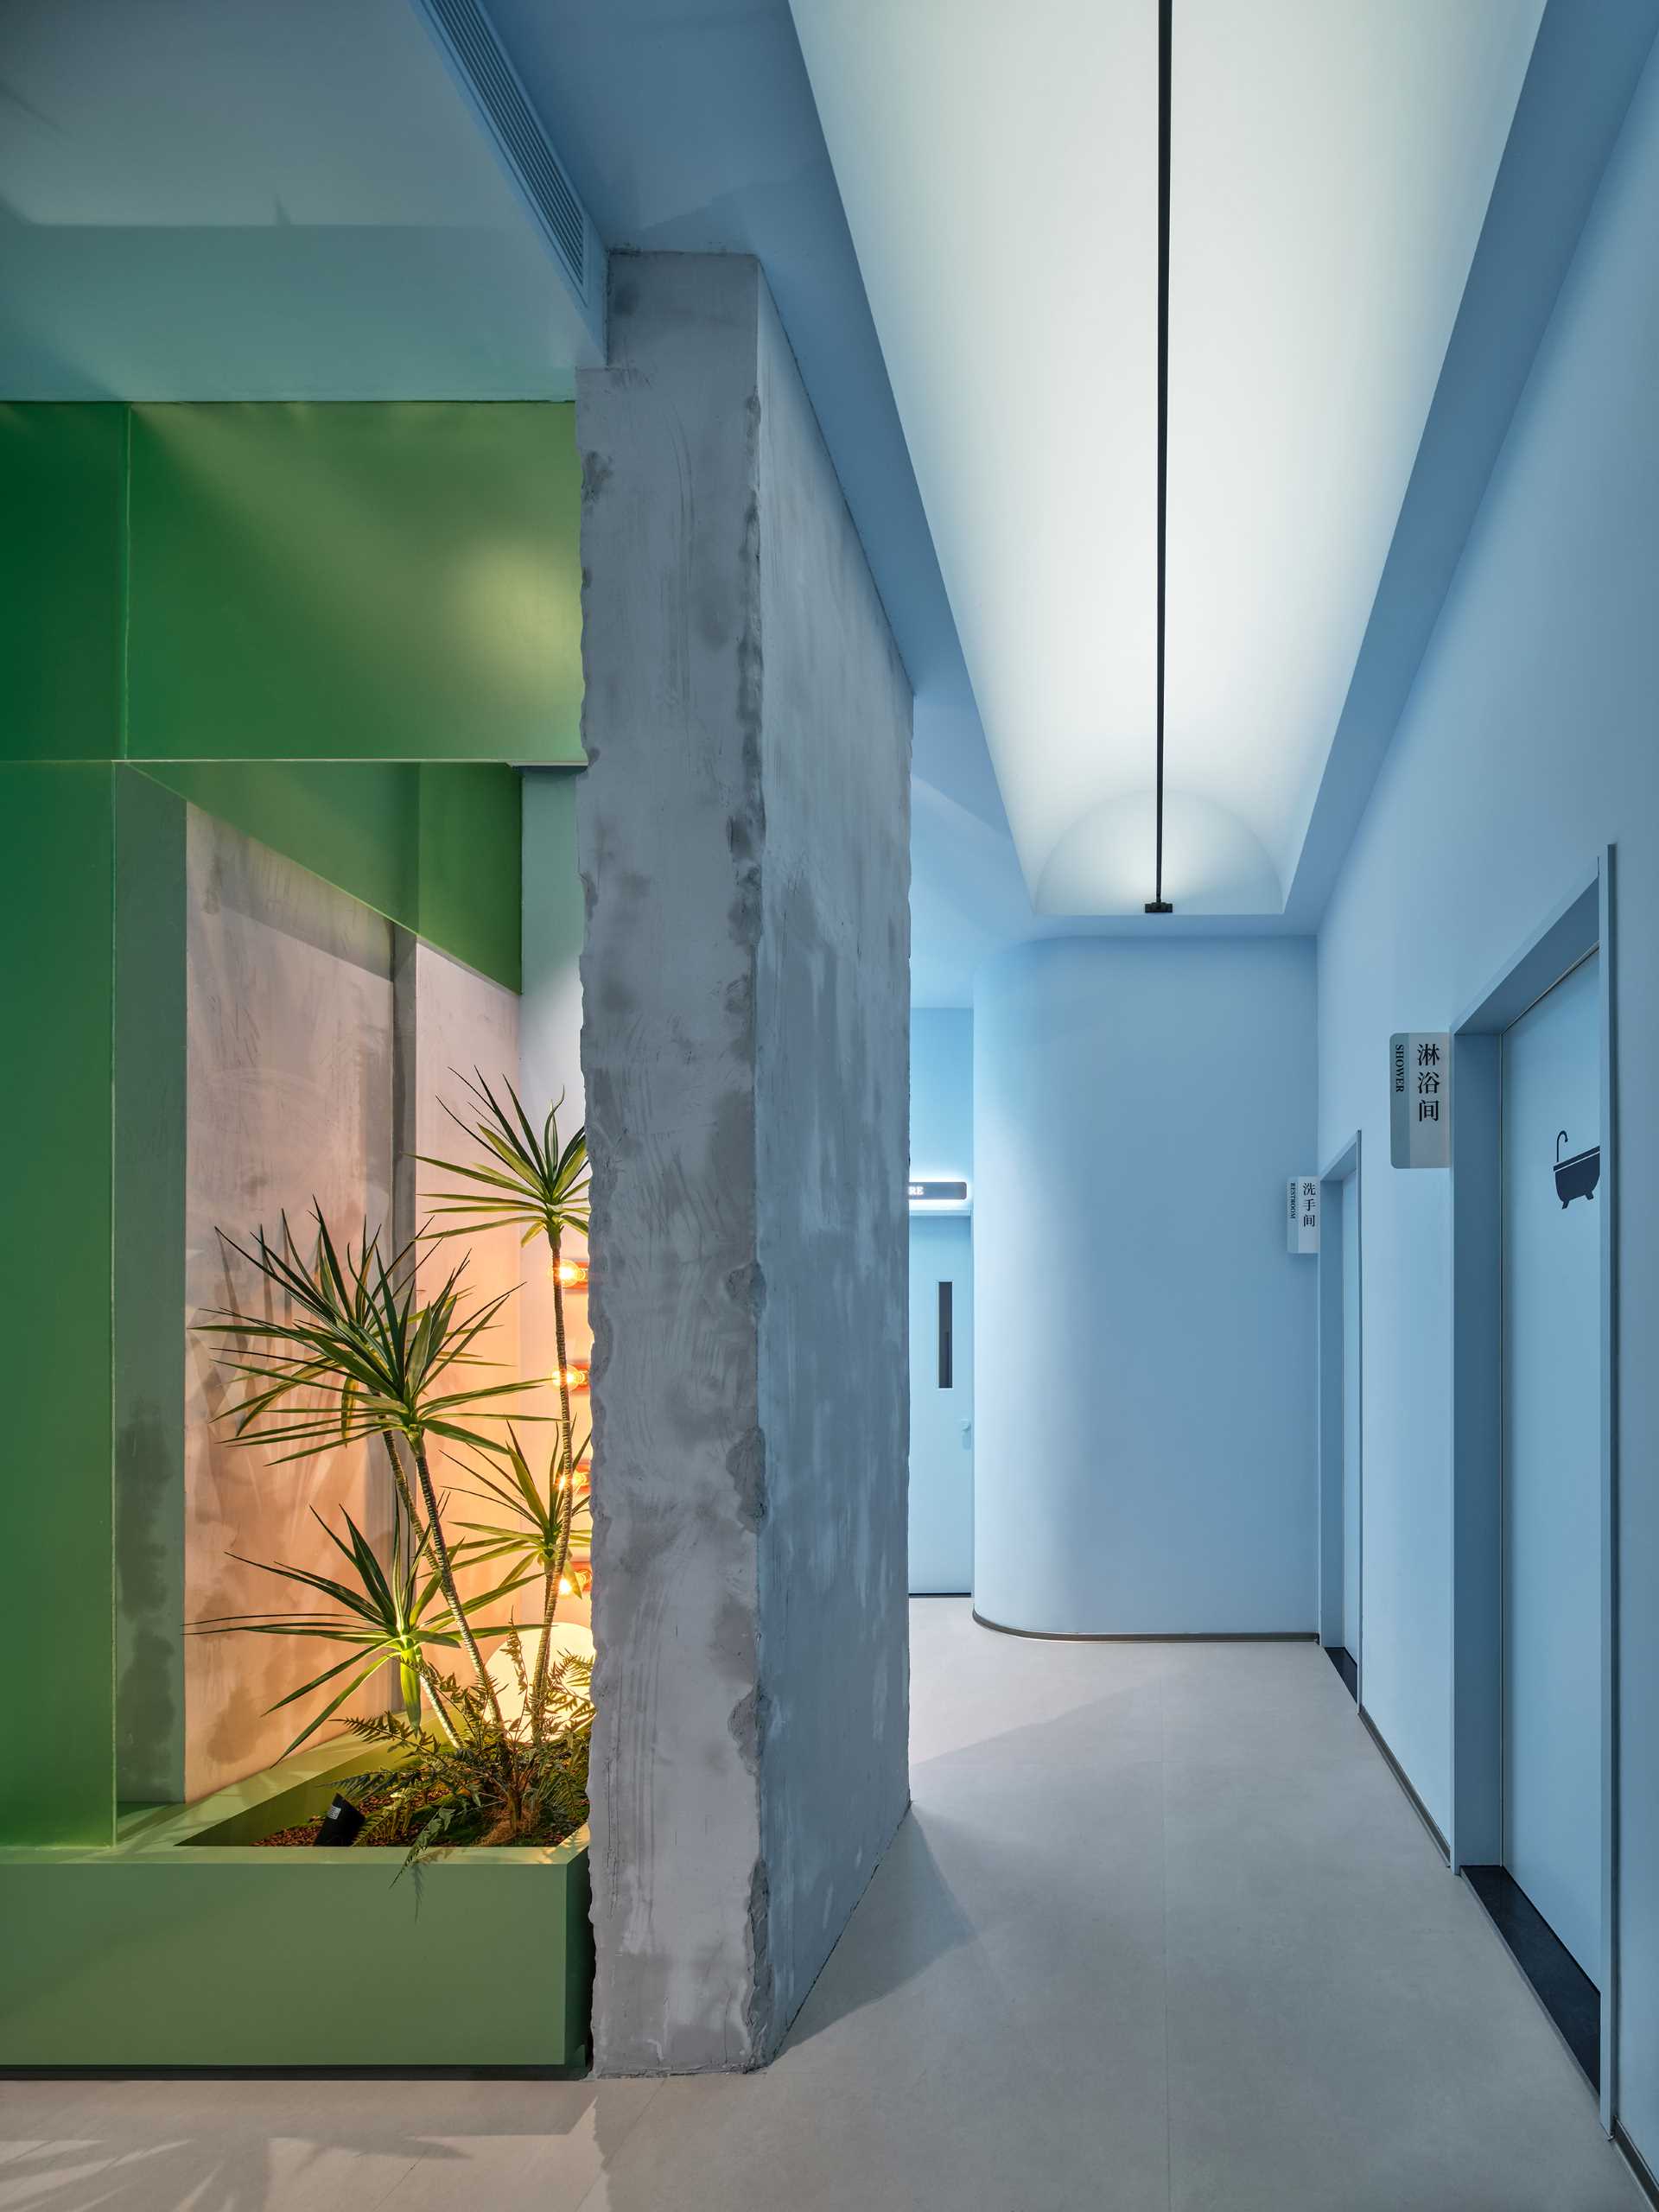 The hallway includes a small planter and original concrete wall, while the light blue hallway leads to the various treatment rooms of this modern skincare center.